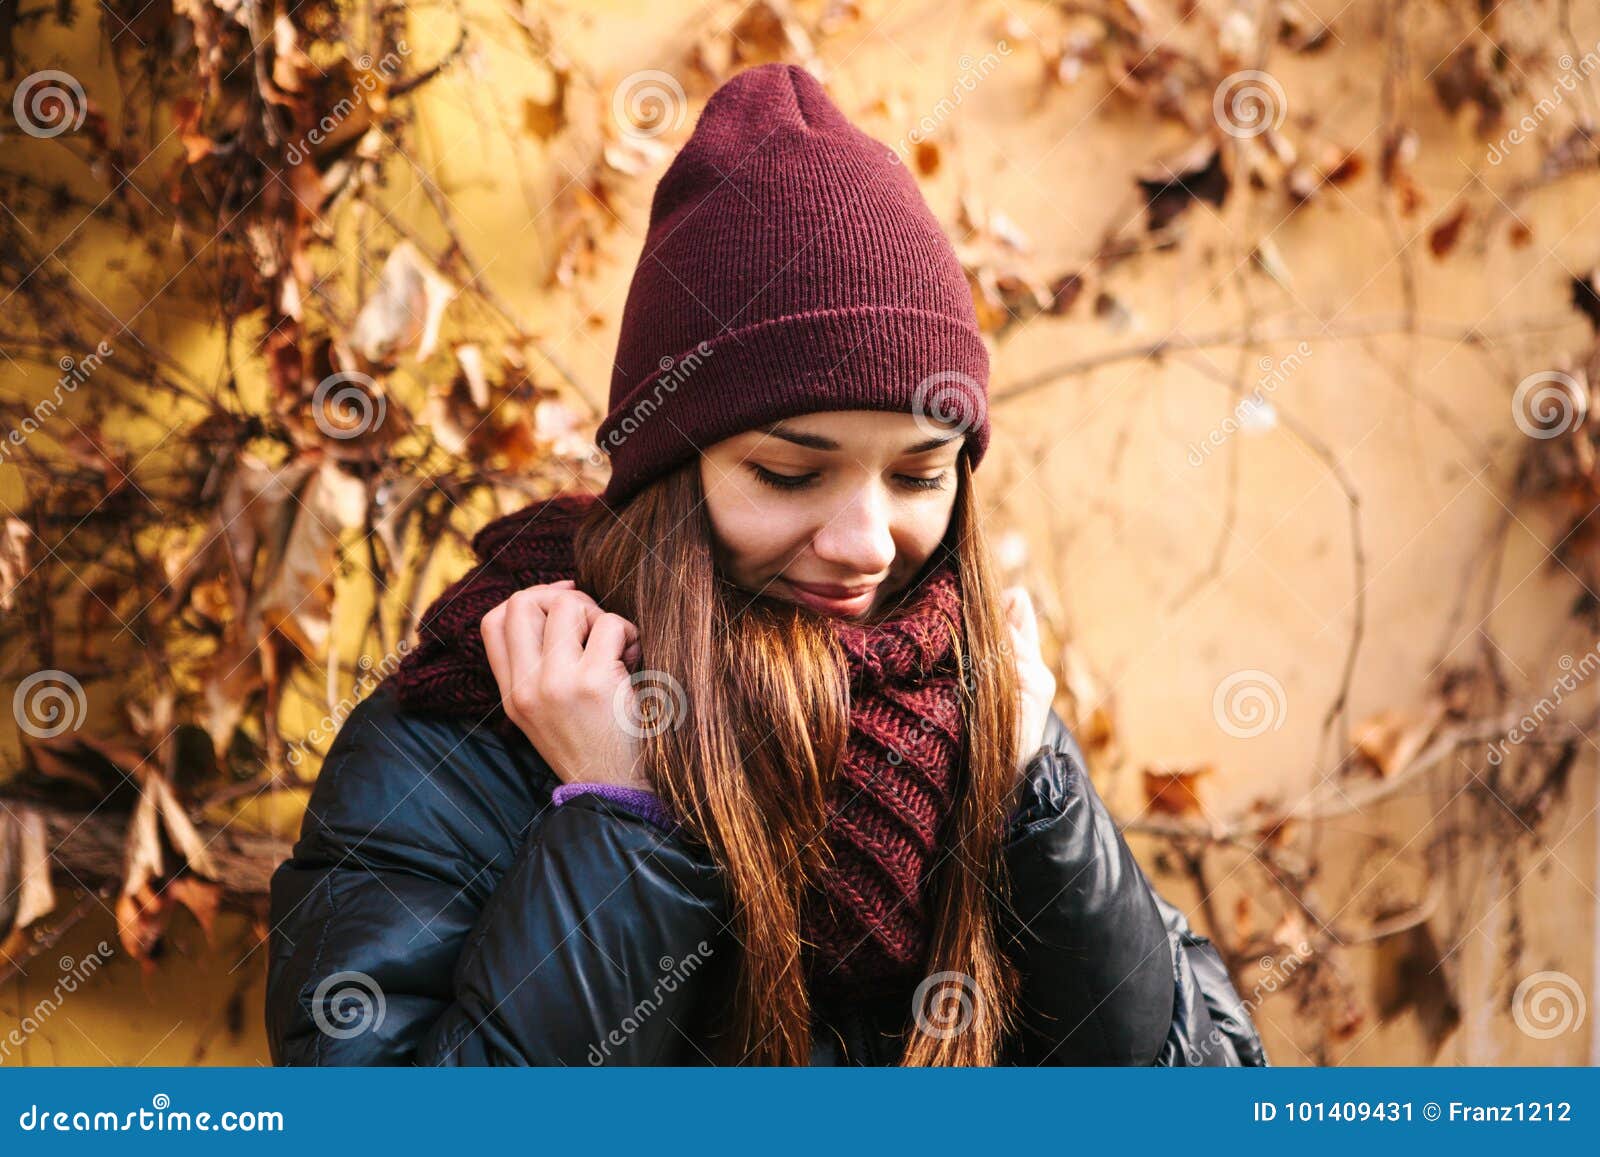 Portrait of Young Positive Beautiful Smiling Girl Adjusting Scarf in ...